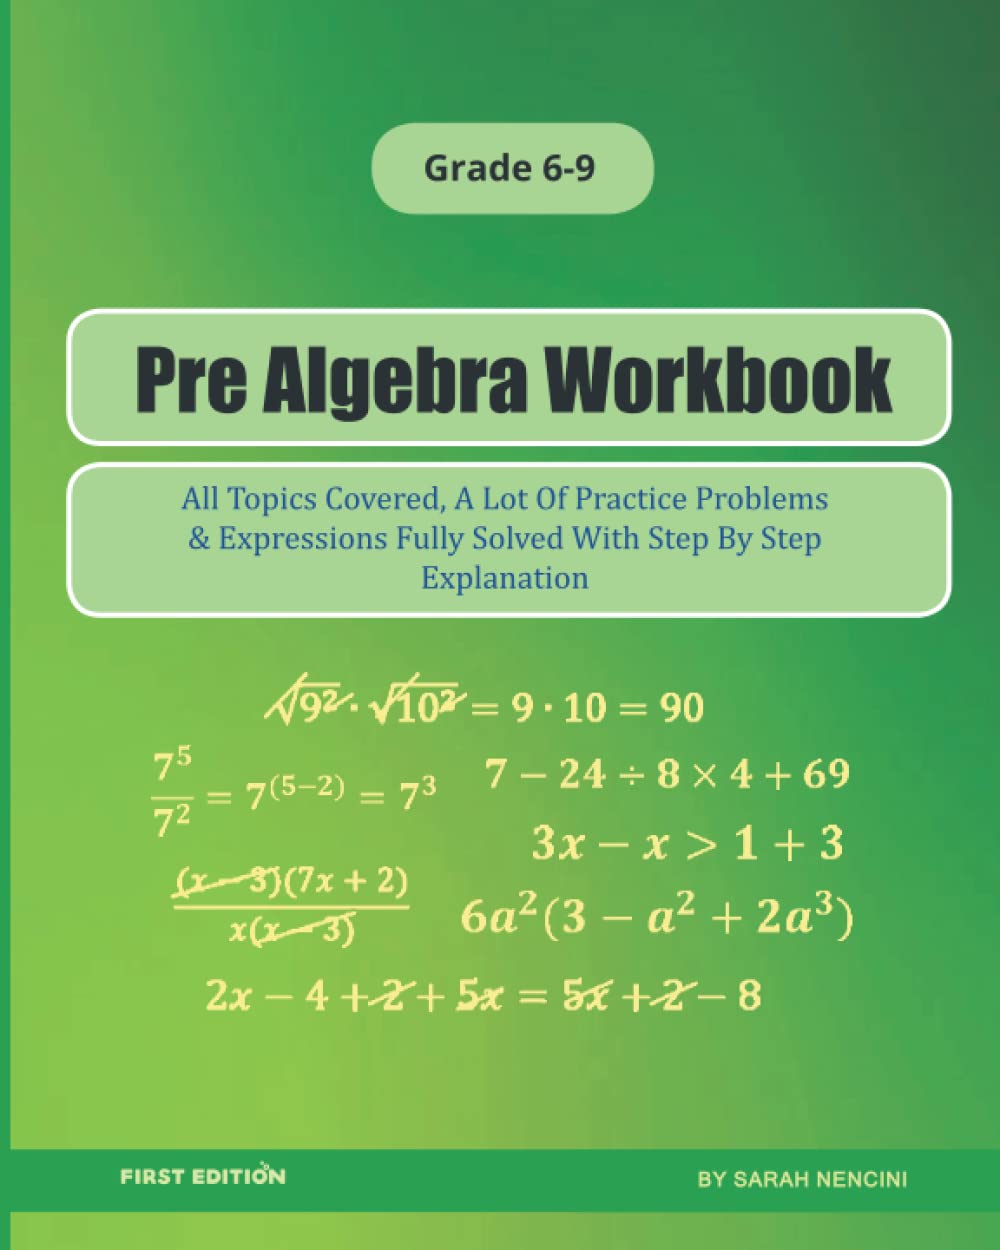 Pre Algebra Workbook: All Topics Covered, A Lot Of Practice Problems & Expressions Fully Solved With Step By Step Explanation